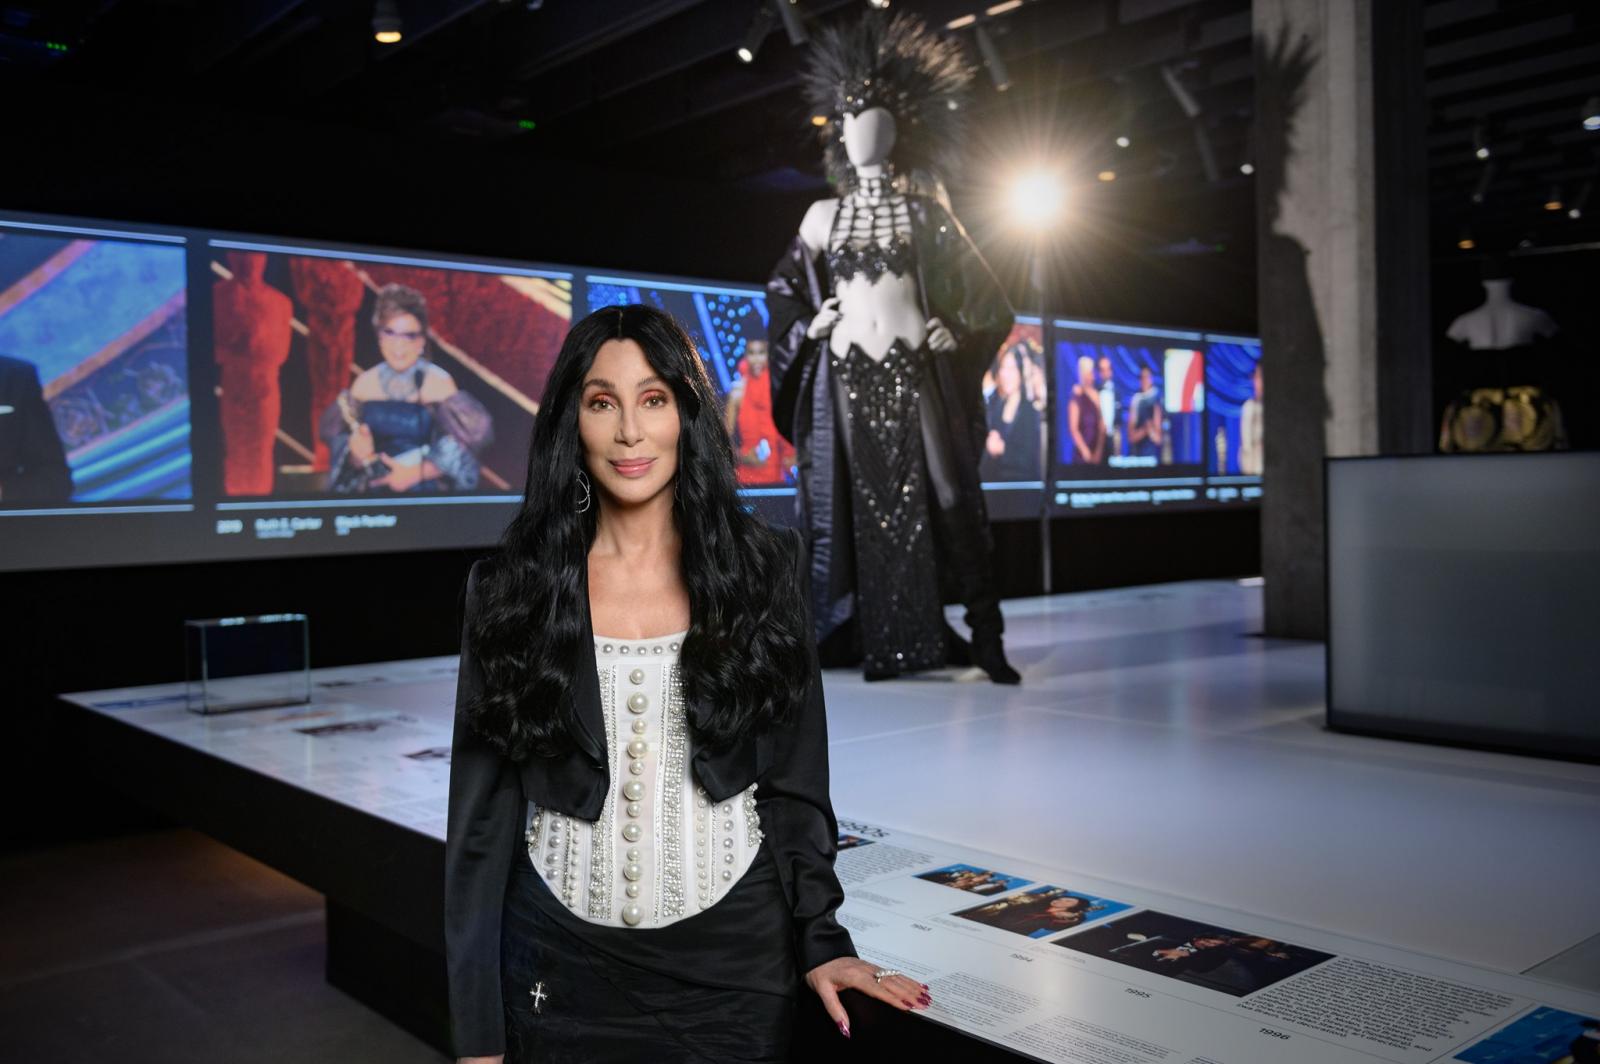 Image from On Set - Cher on "A Night in the Academy Museum" ABC